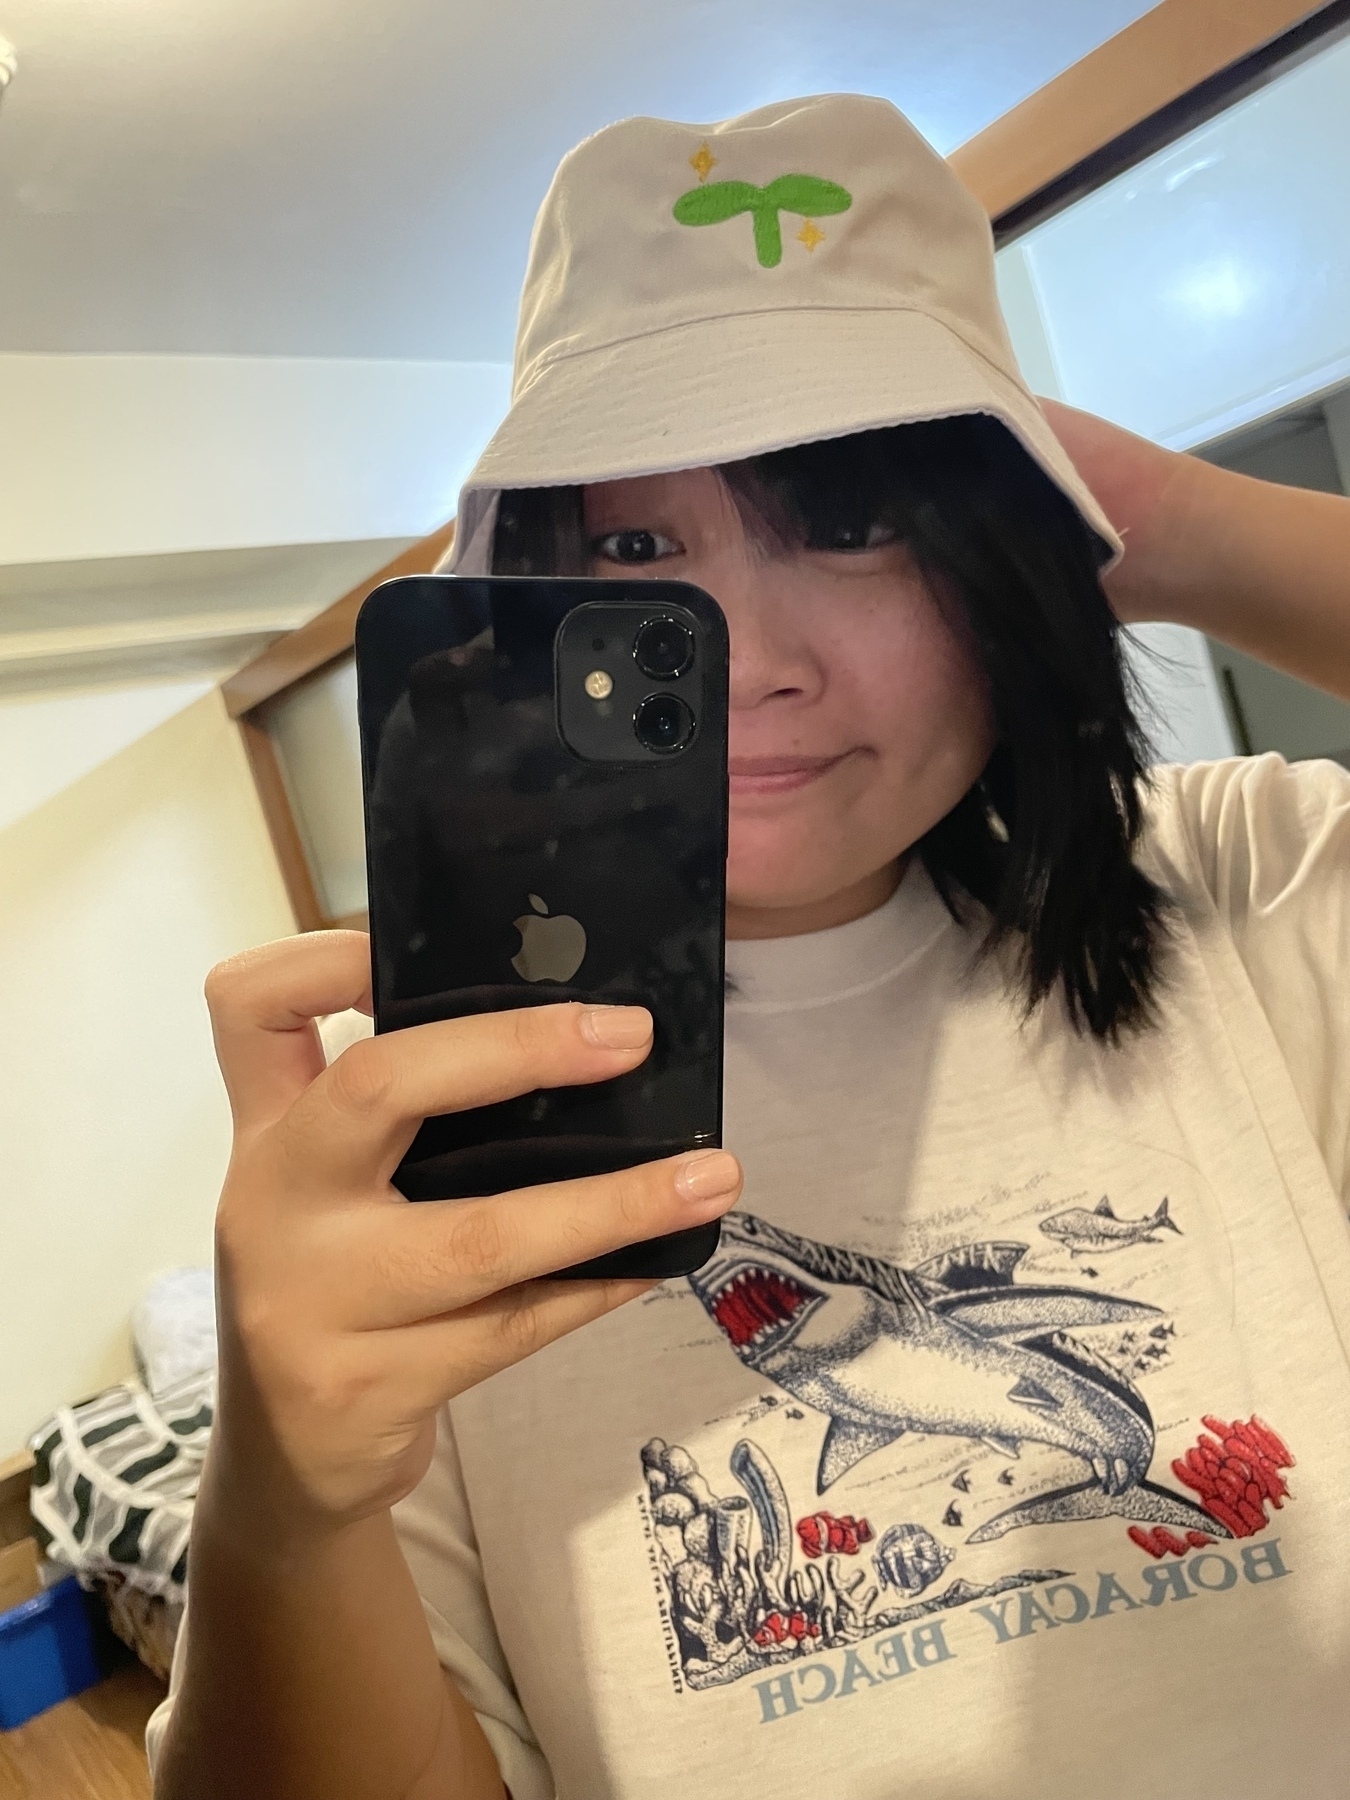 Mirror selfie of Chi wearing a white bucket hat with a green sprout icon on it, which usually signifies a new adventurer or new account in FFXIV.